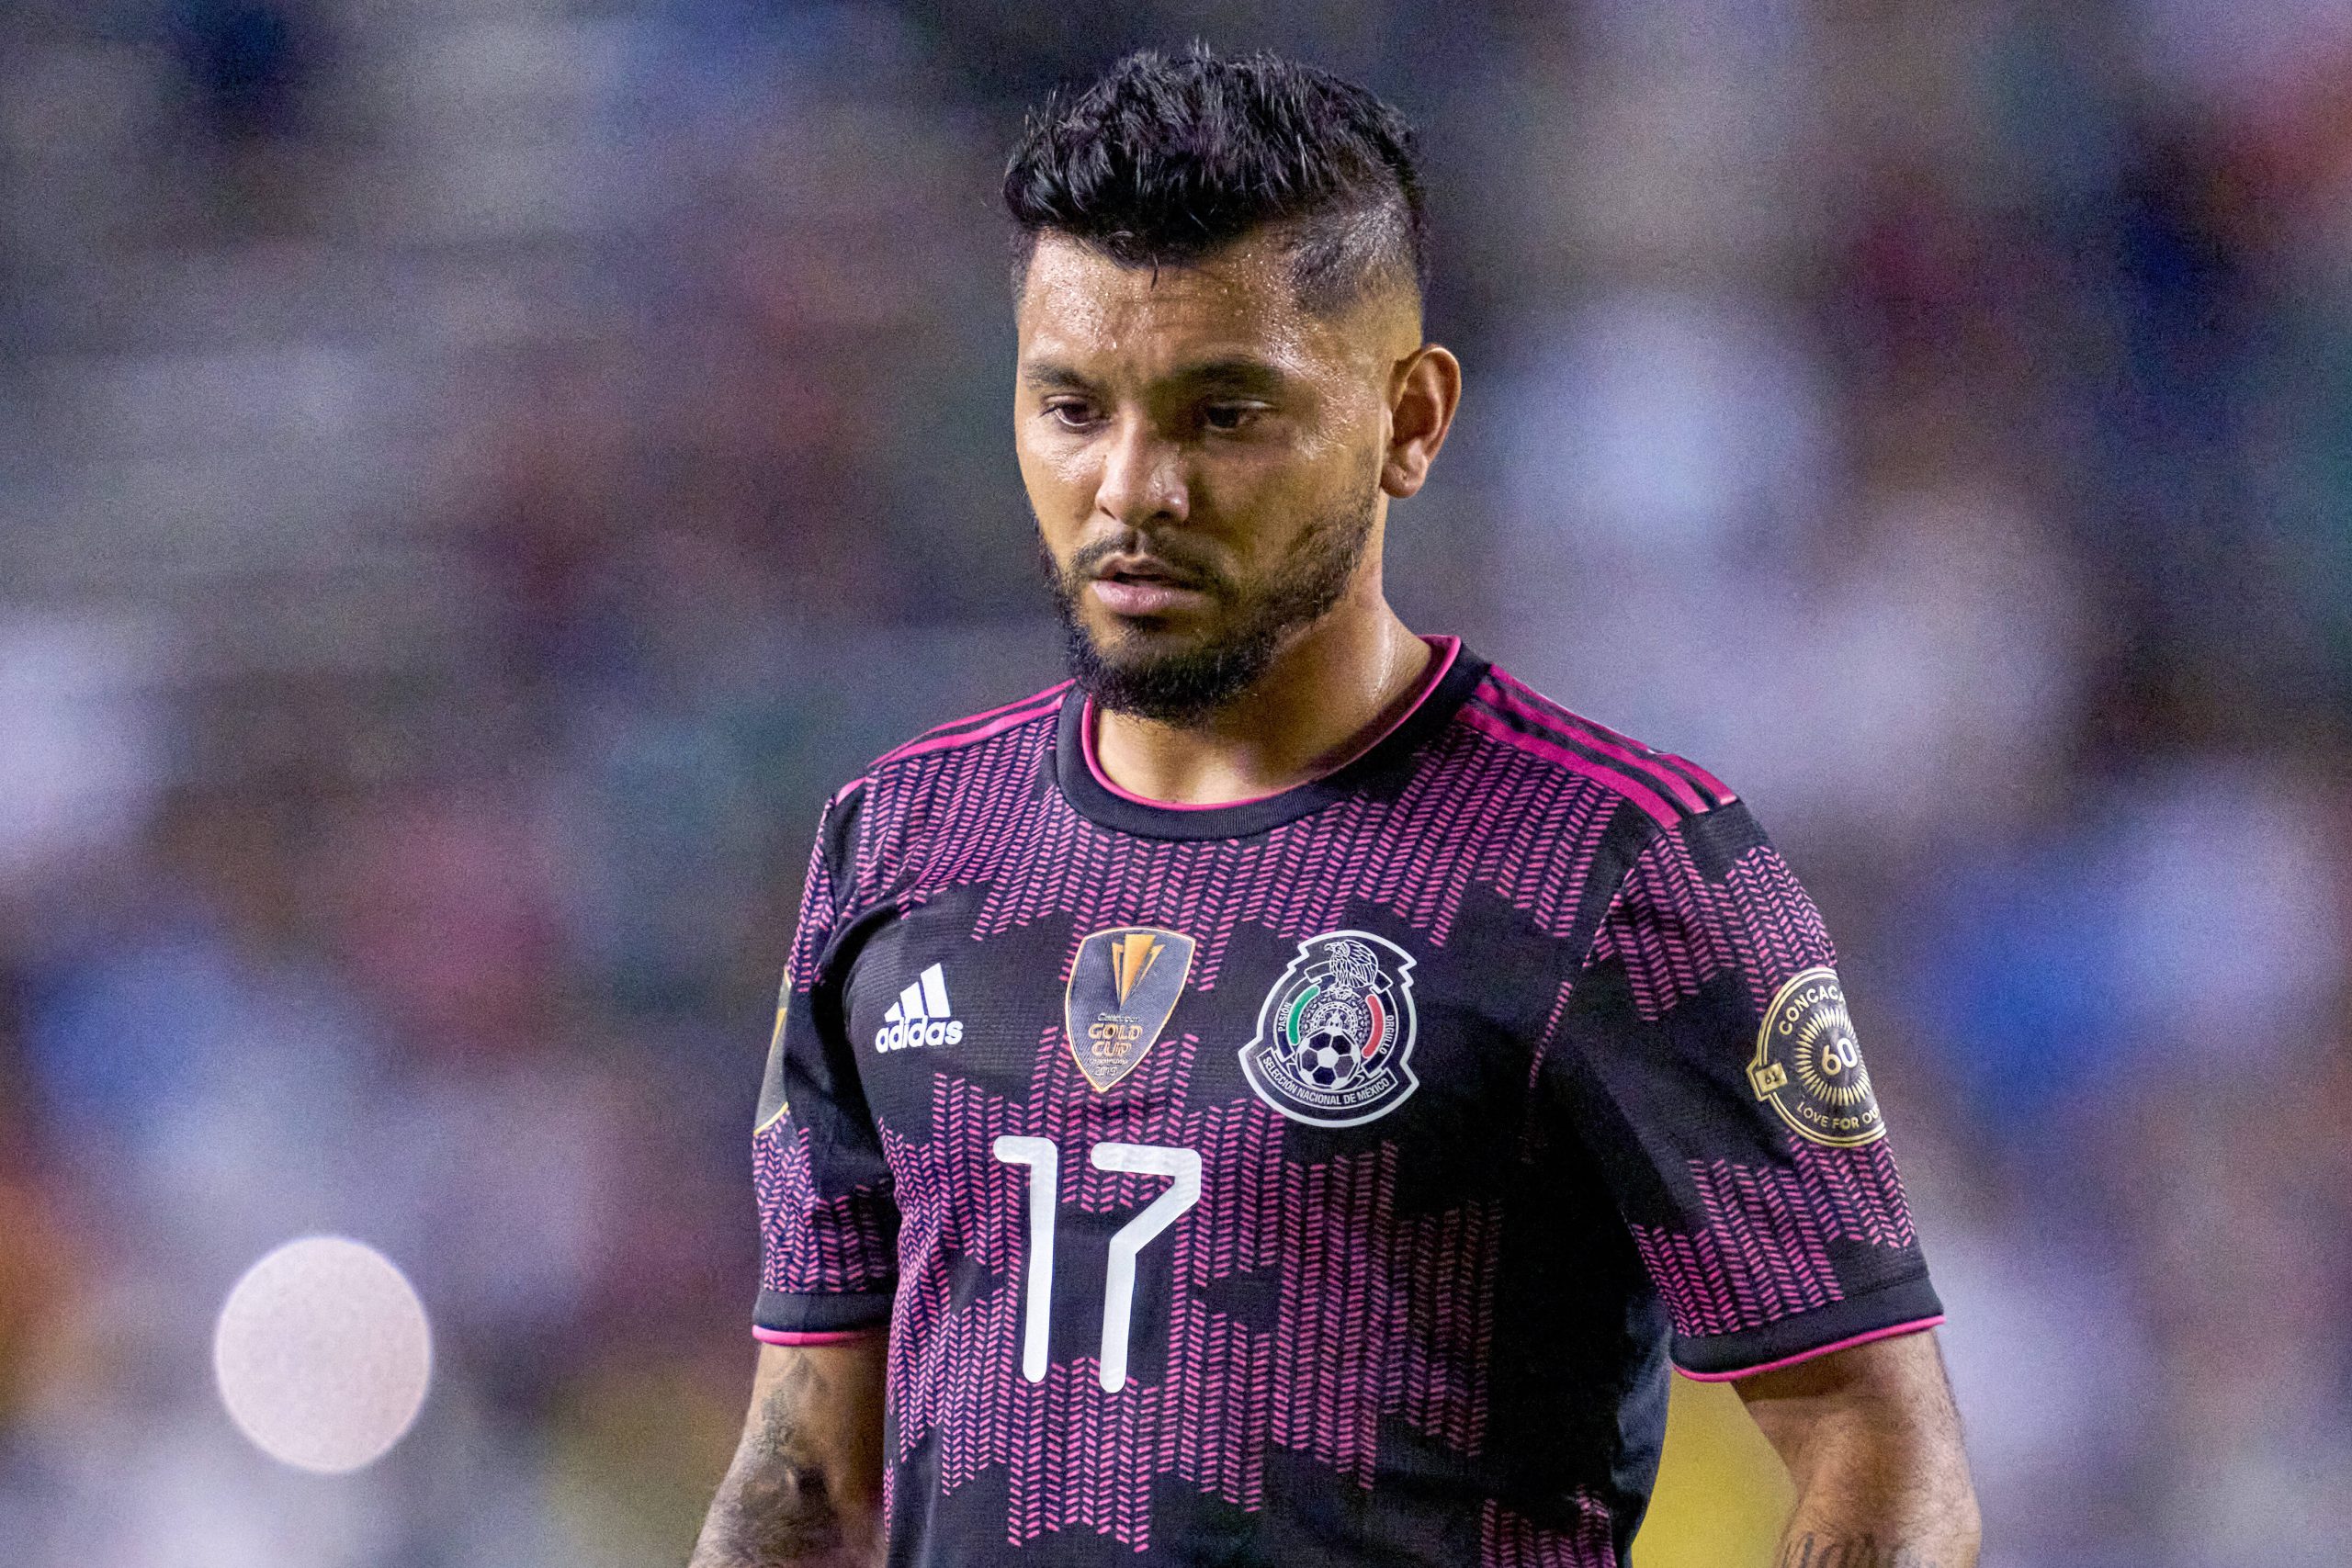 Jesus Corona in action for the Mexico national team in the CONCACAF Gold Cup.